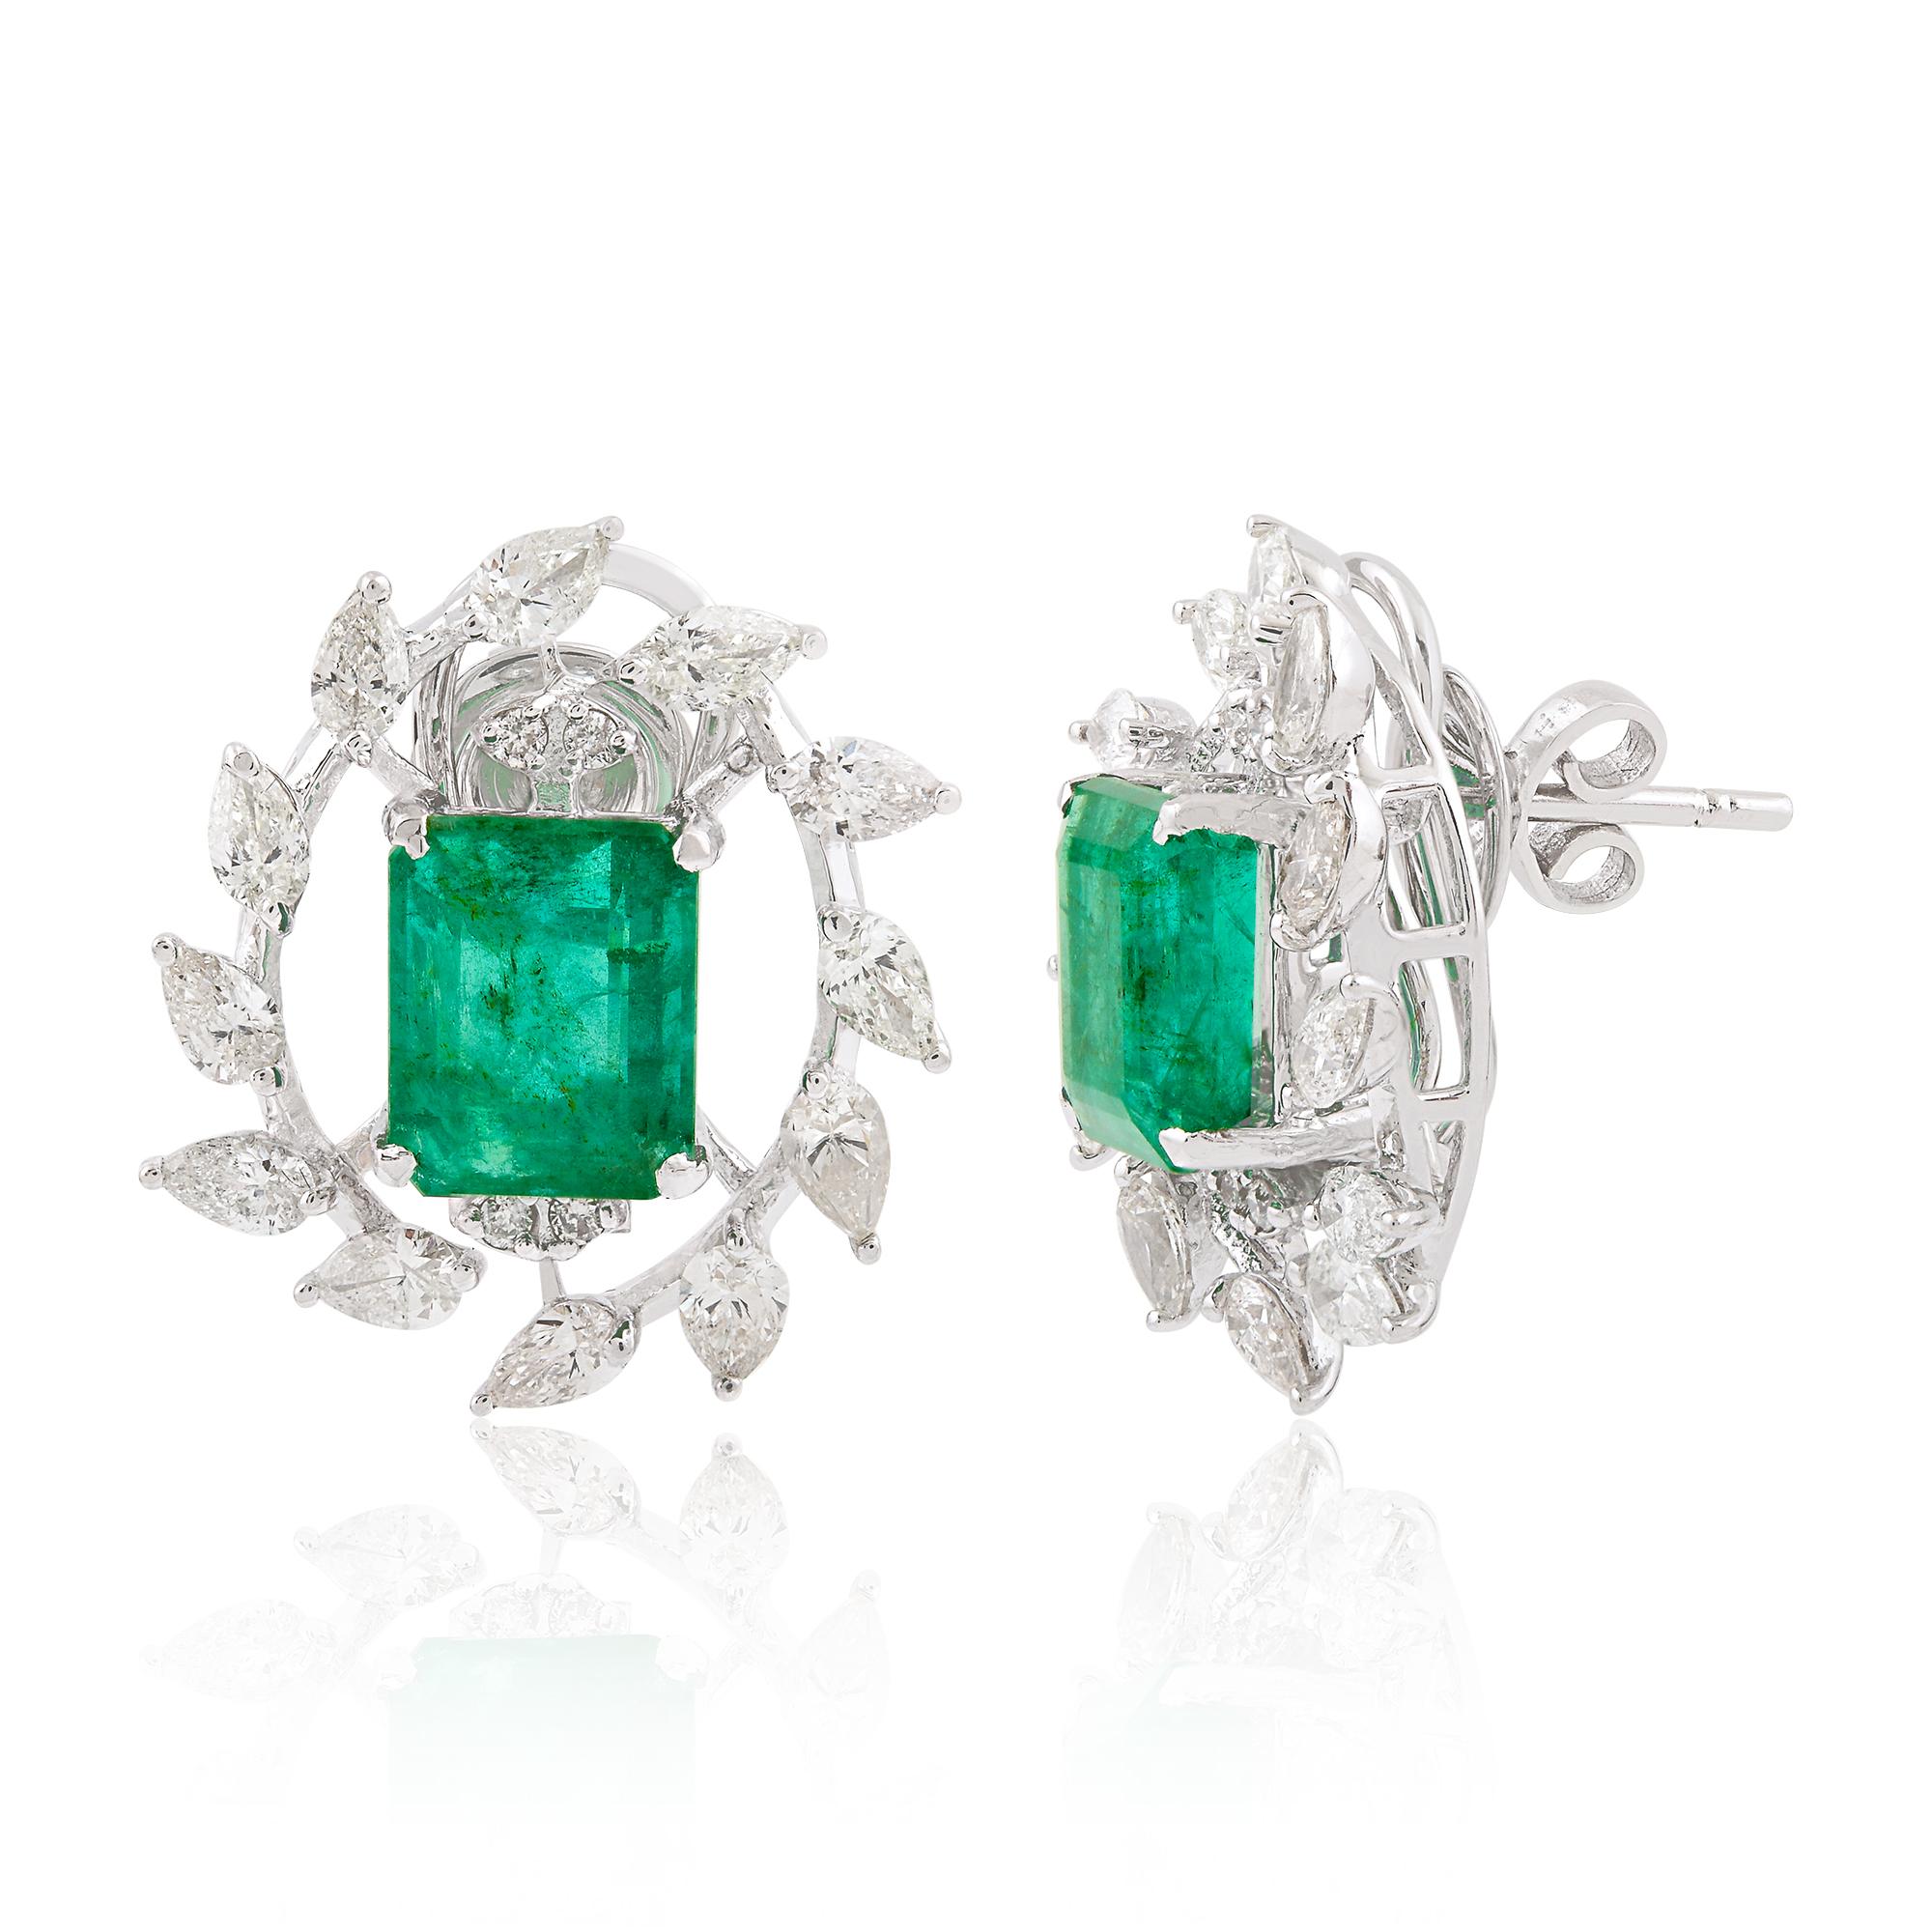 The pear-shaped diamonds, with their distinctive teardrop-like shape, complement the emerald and add additional sparkle and brilliance to the earrings. The diamonds are carefully selected for their quality, including considerations of cut, color,